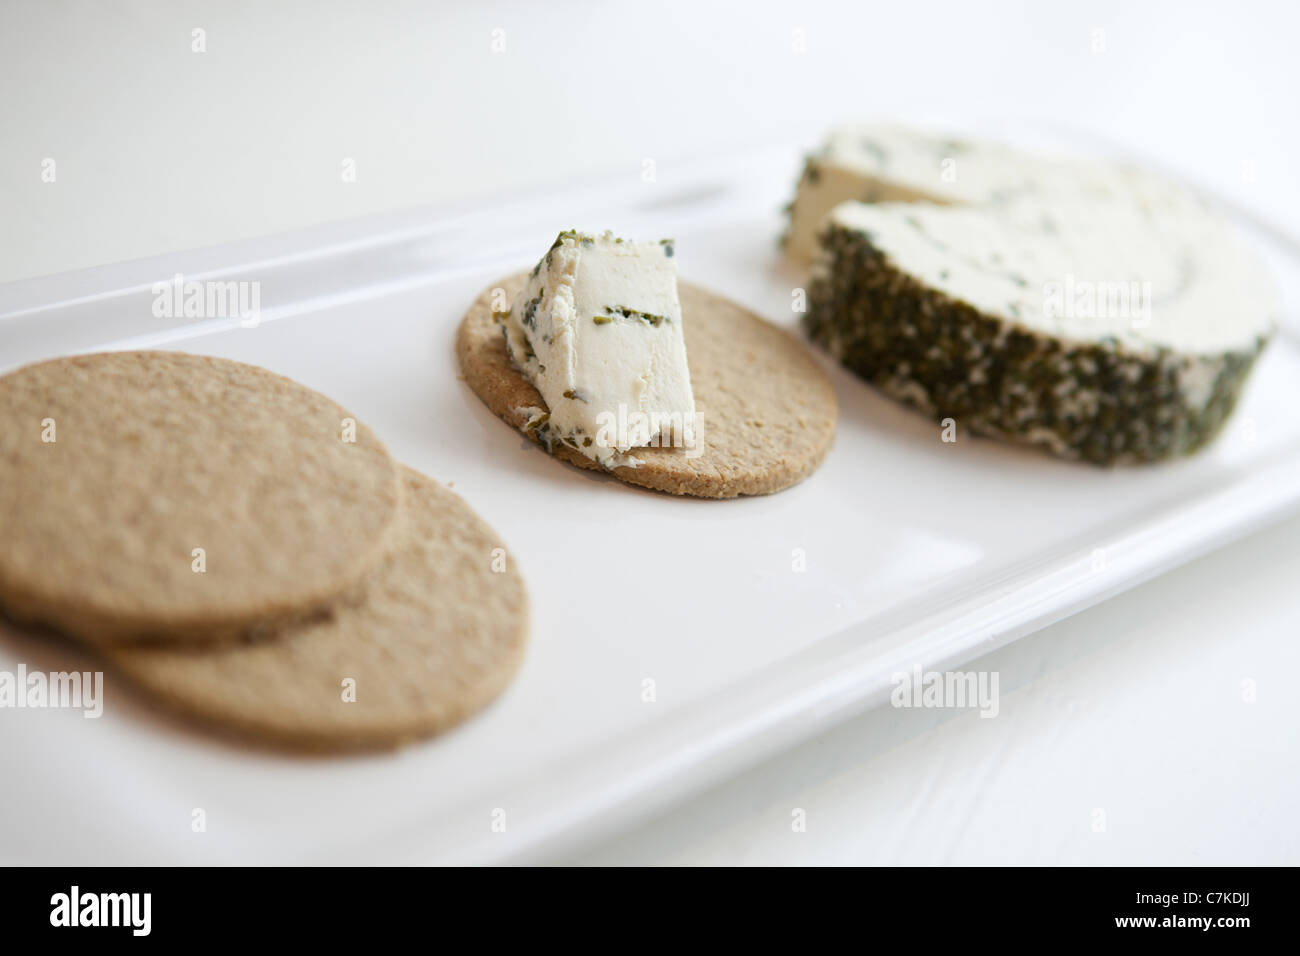 Three oatcakes on a plate with a block of garlic and herb cream cheese Stock Photo